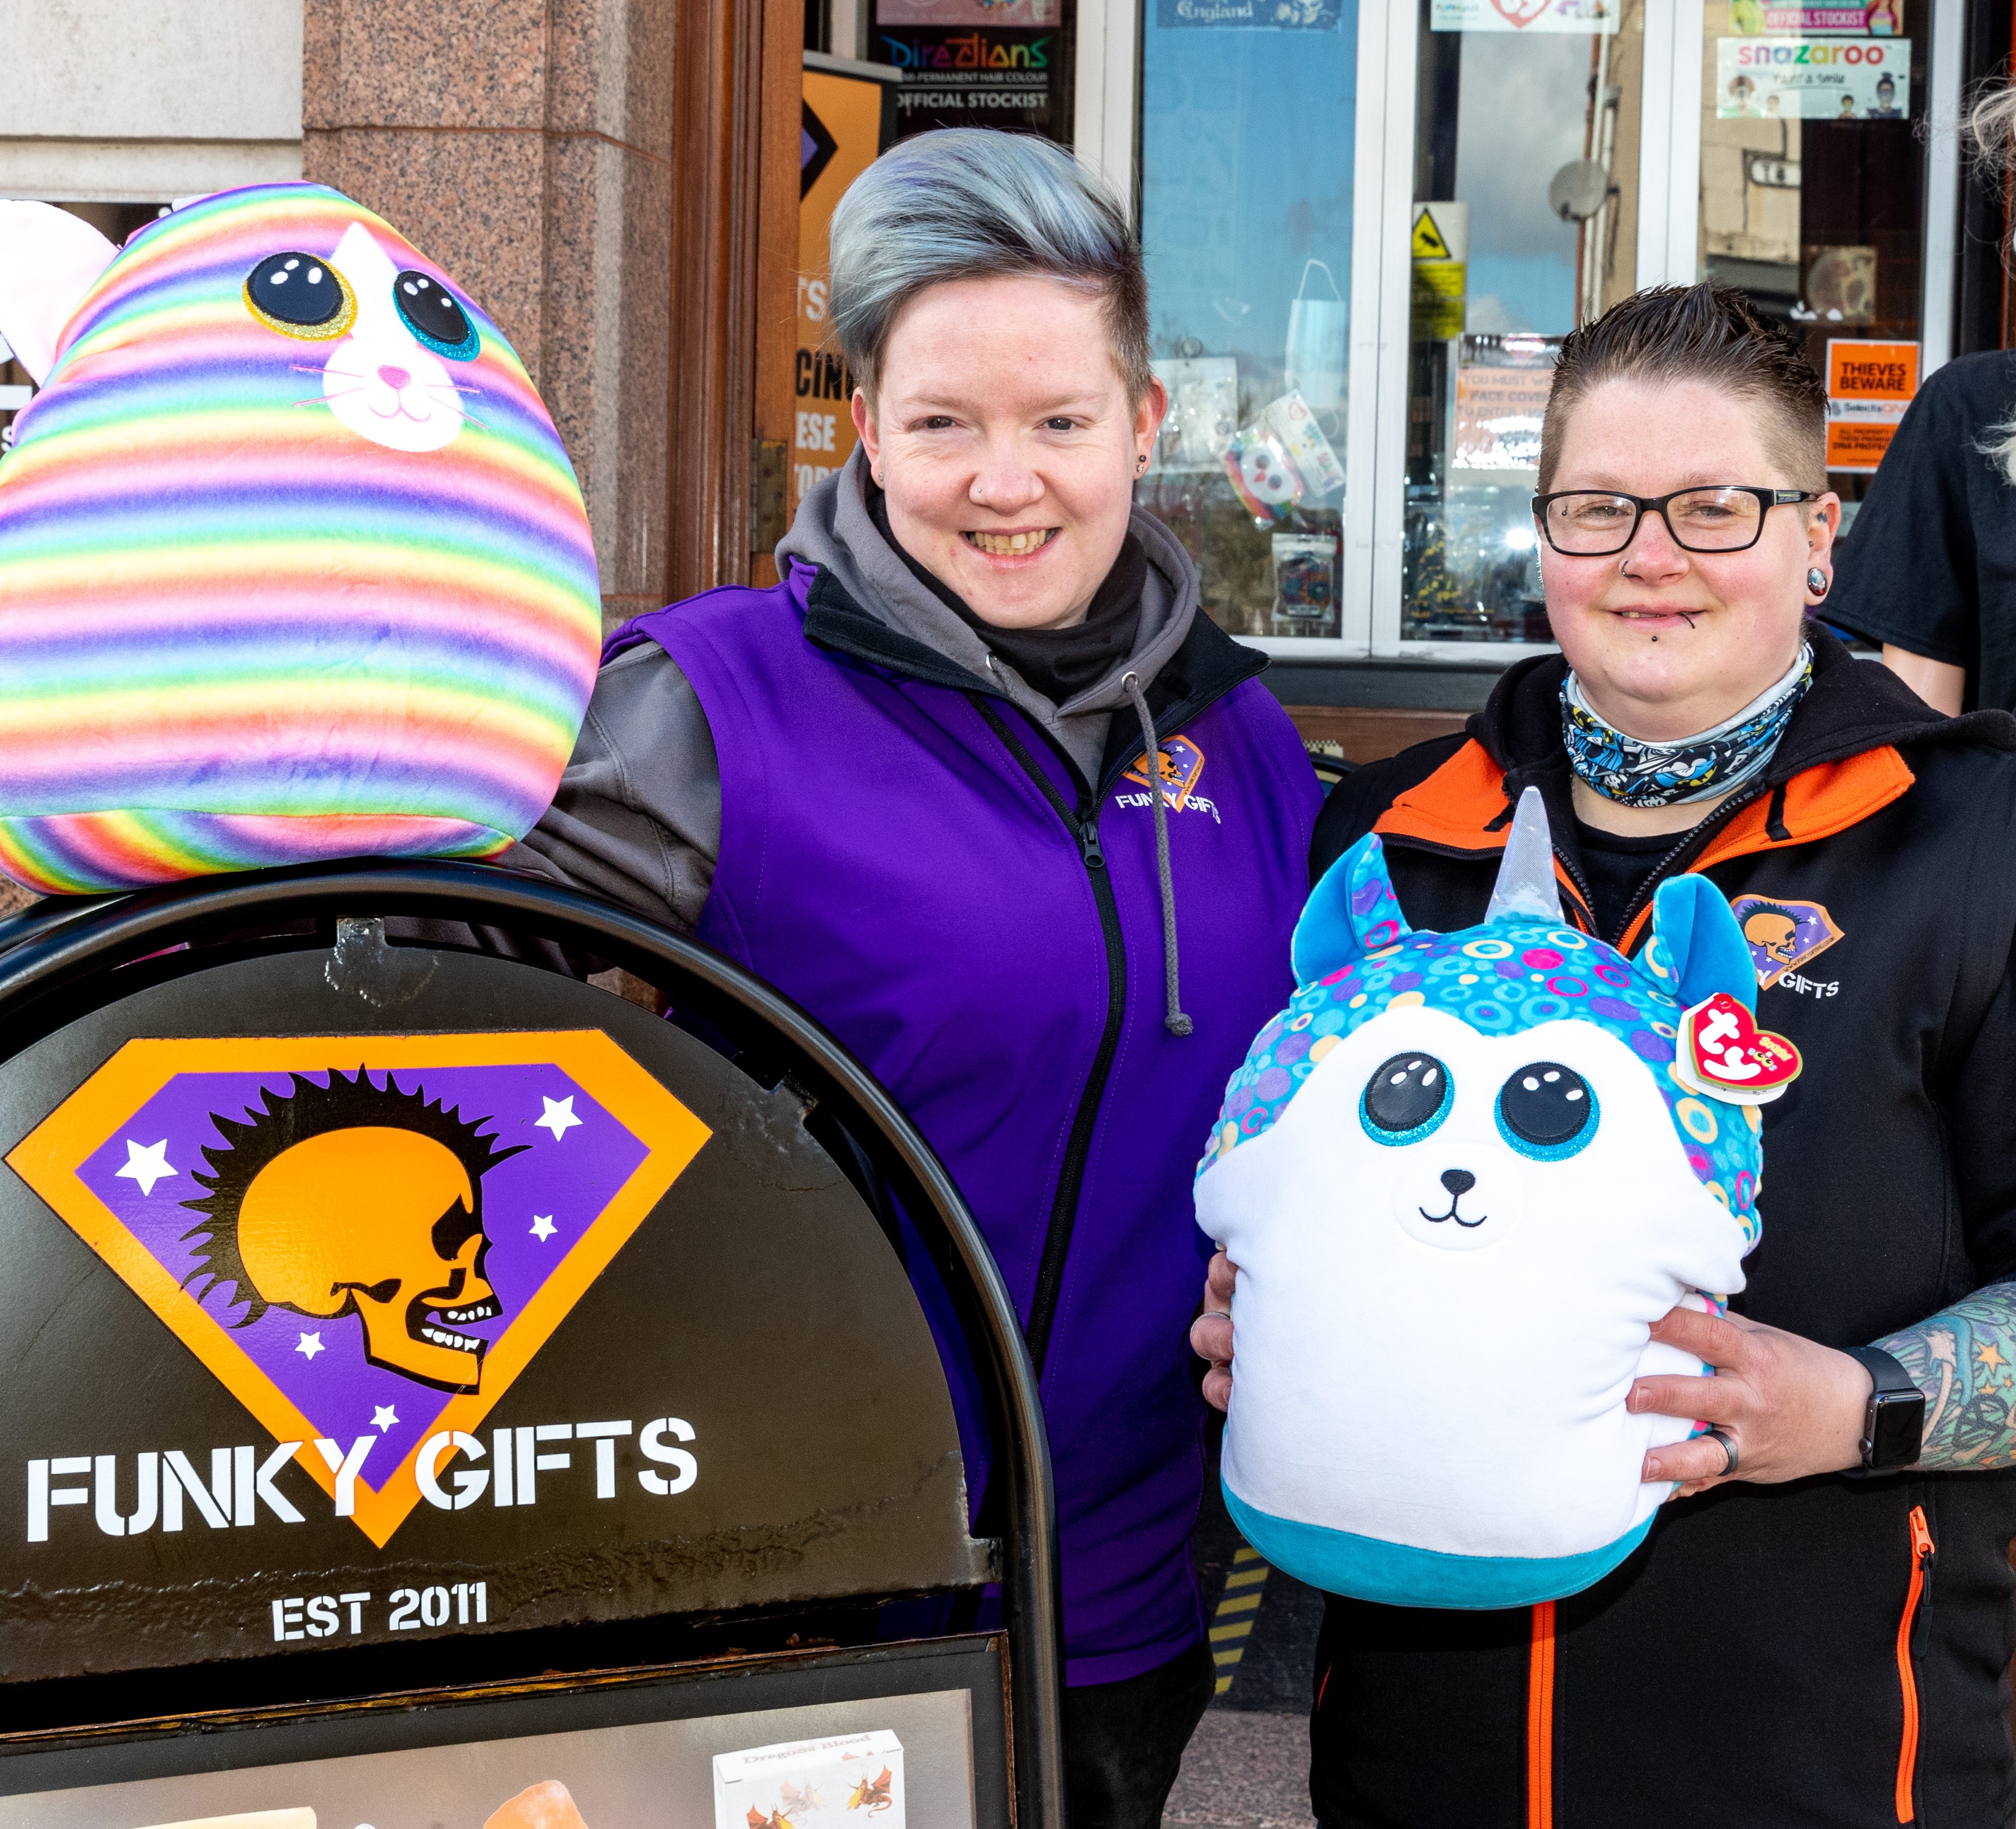 Funky Gifts to celebrate 10-year anniversary thanks to grant funding